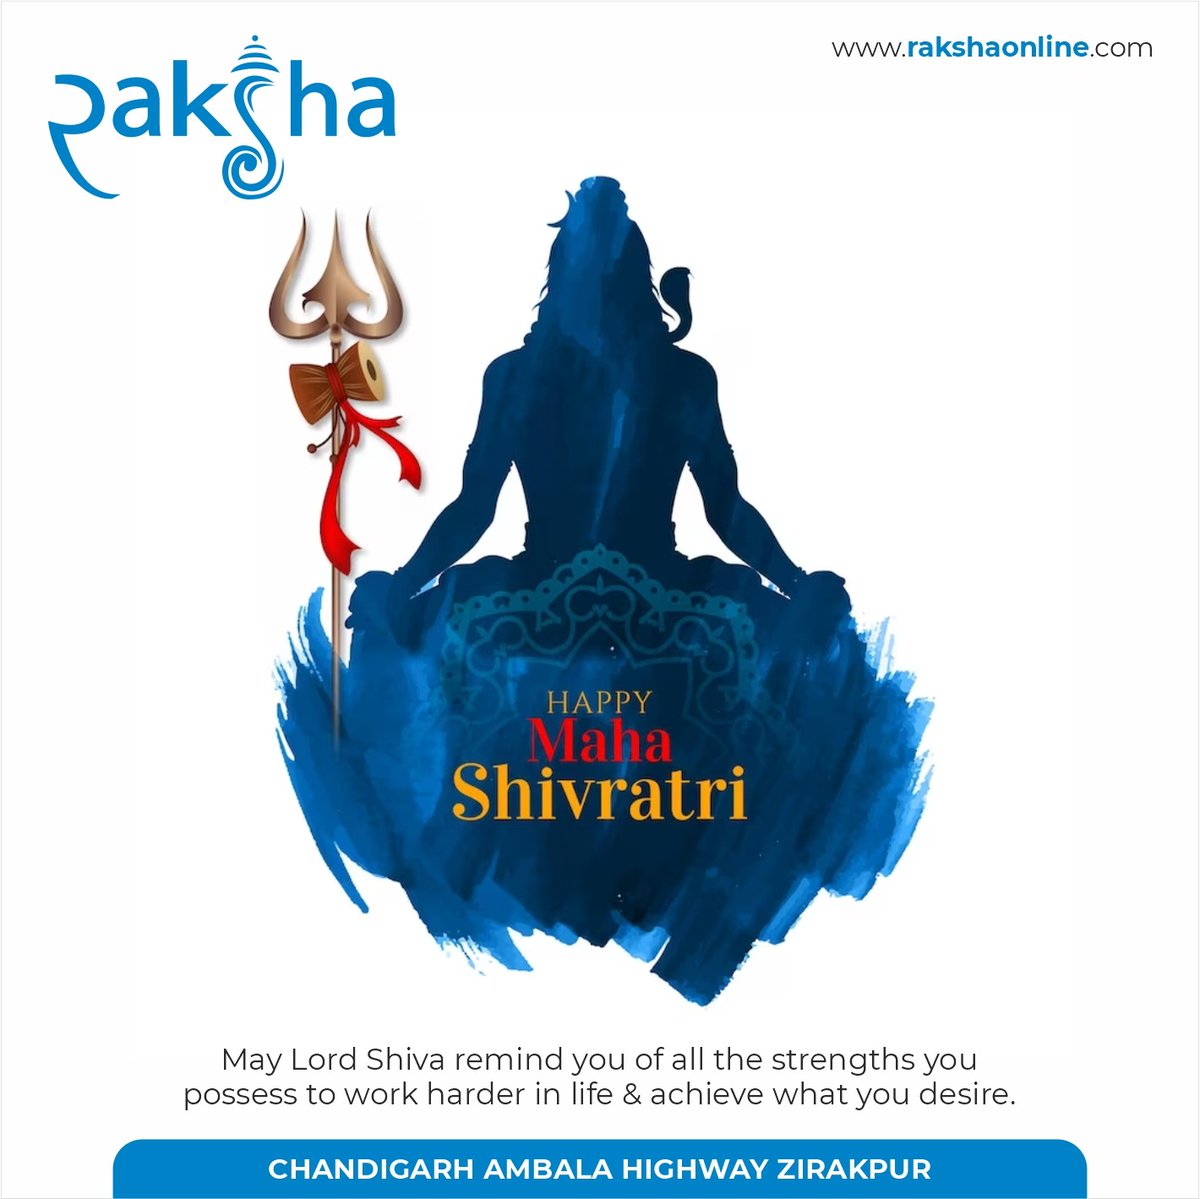 Happy Maha Shivratri - May Lord Shiva Remind You Of All The Strengths You Possess To Work Harder In Life & Achieve What You Desire.

#MahaShivratri #LordShiva #DivineBlessings #ObstacleFree #IgniteYourDreams #DivineGrace #SpiritualJourney #BlessingsFromShiva #RakshaGroup